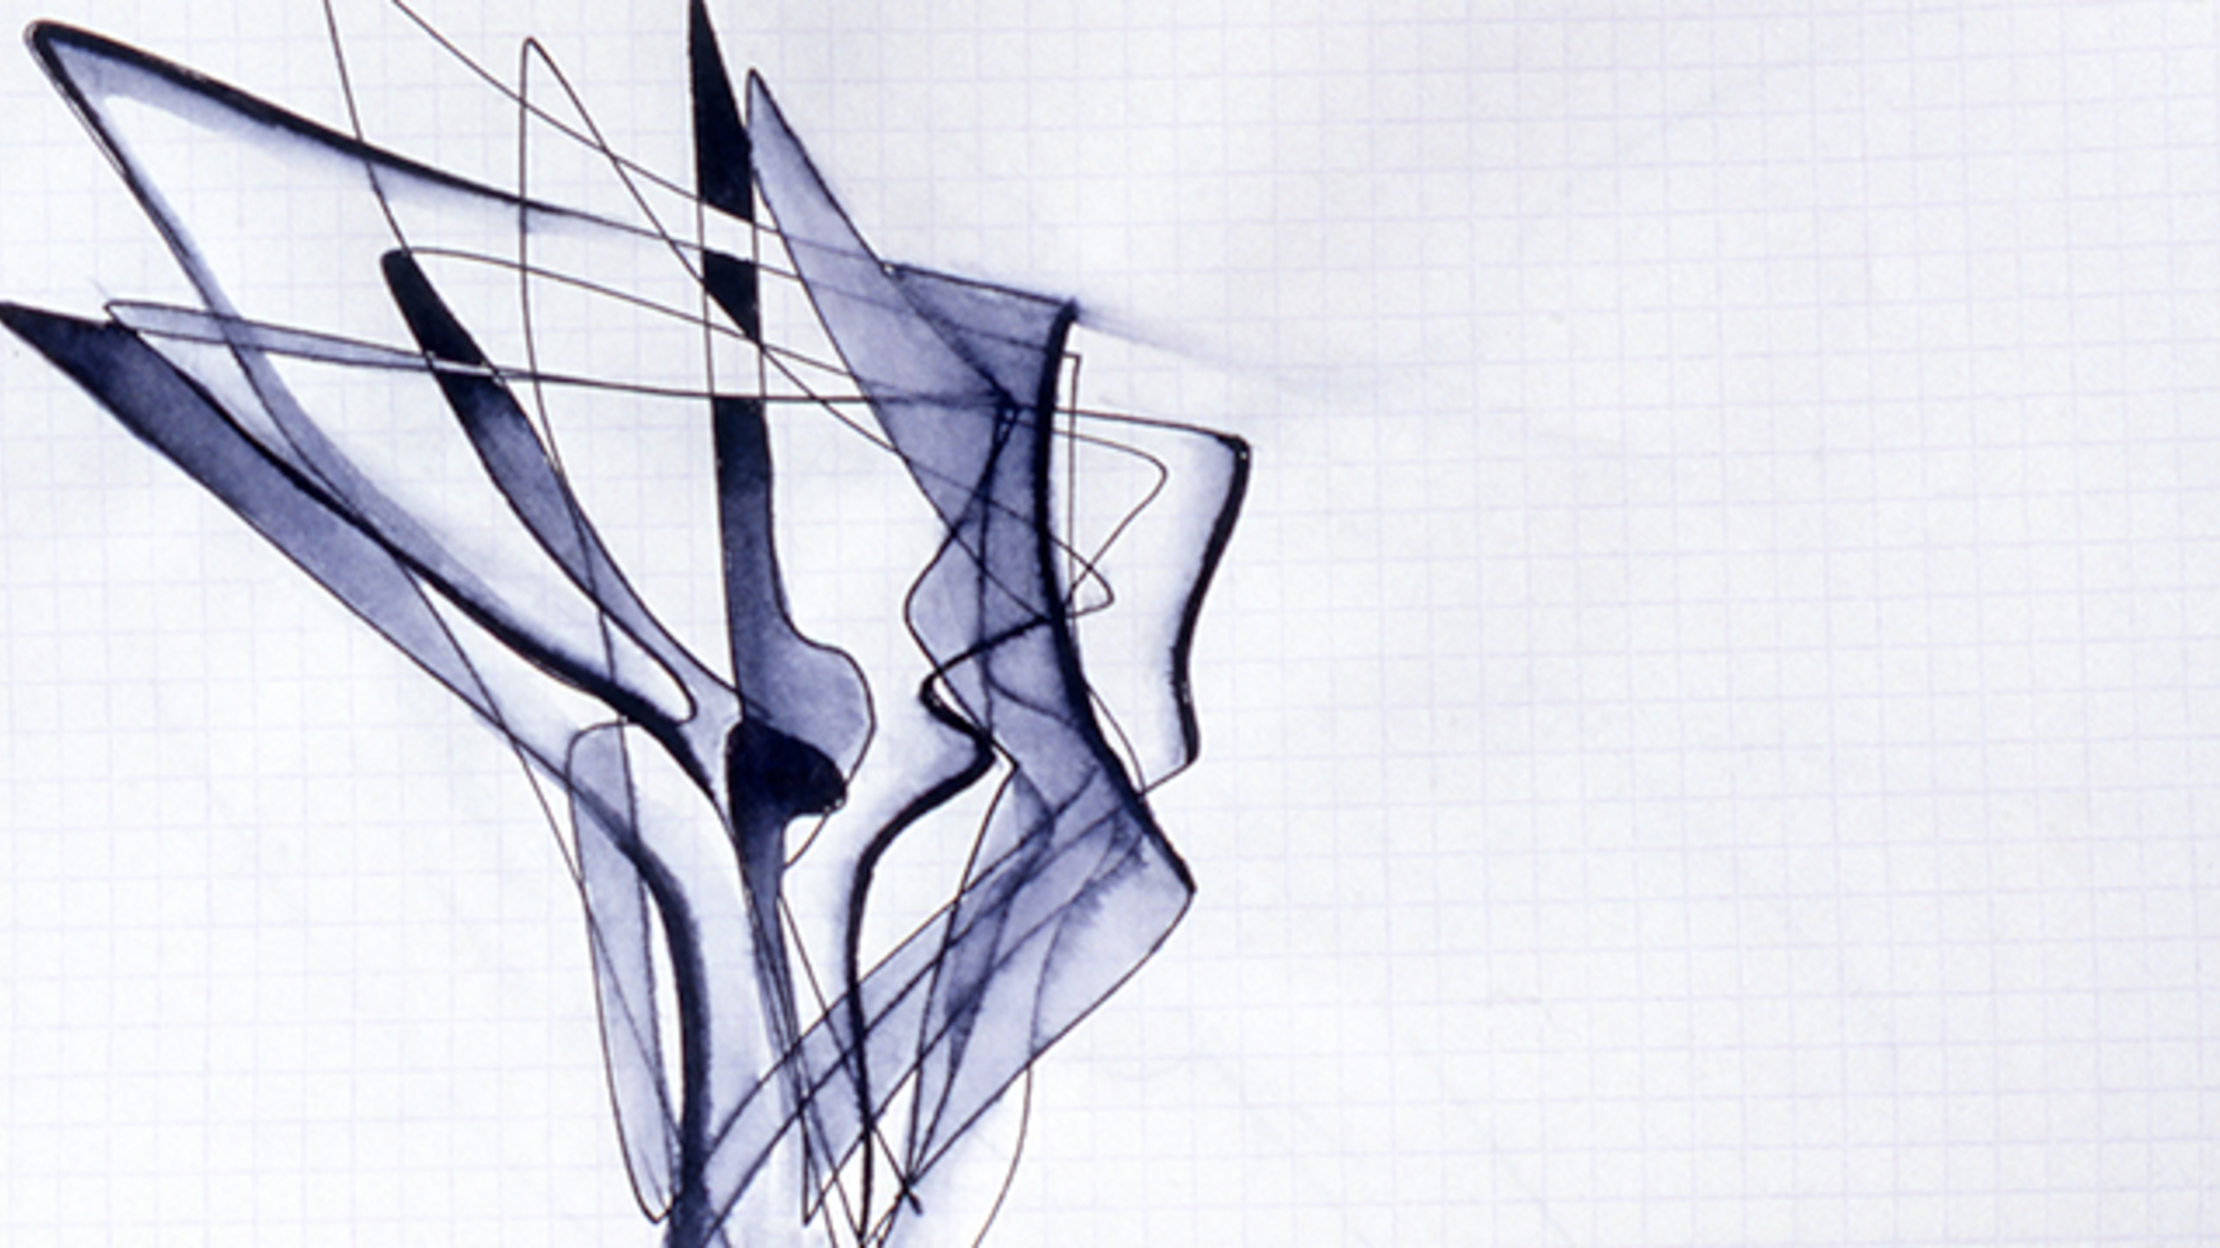 Rarely Seen Sketches by Architect Zaha Hadid Go on Display in London